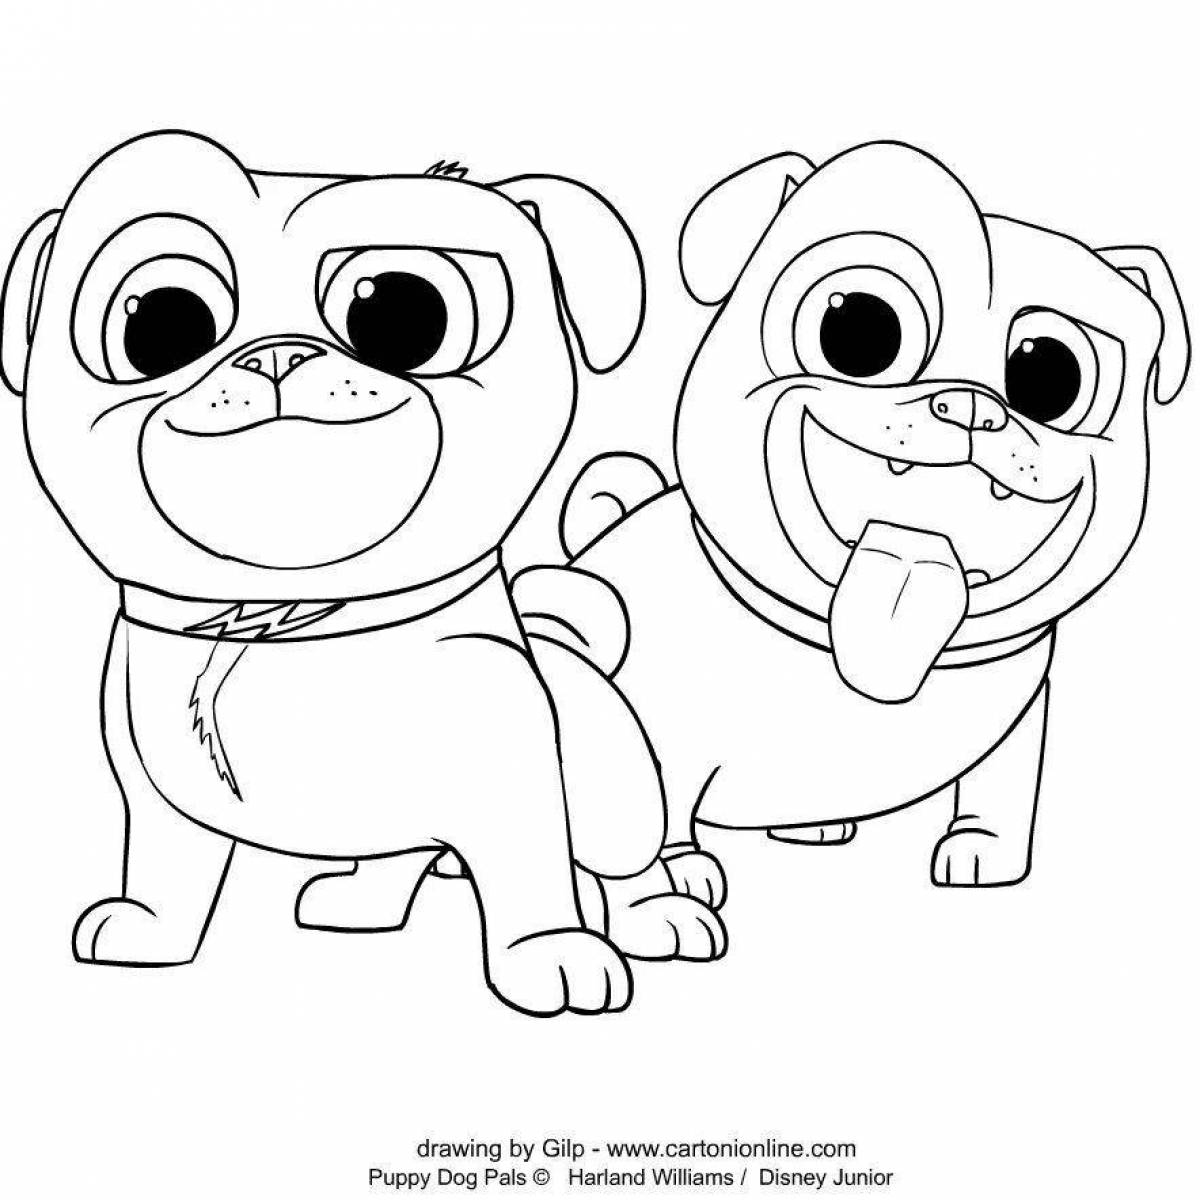 Bingo and role coloring page shimmering color